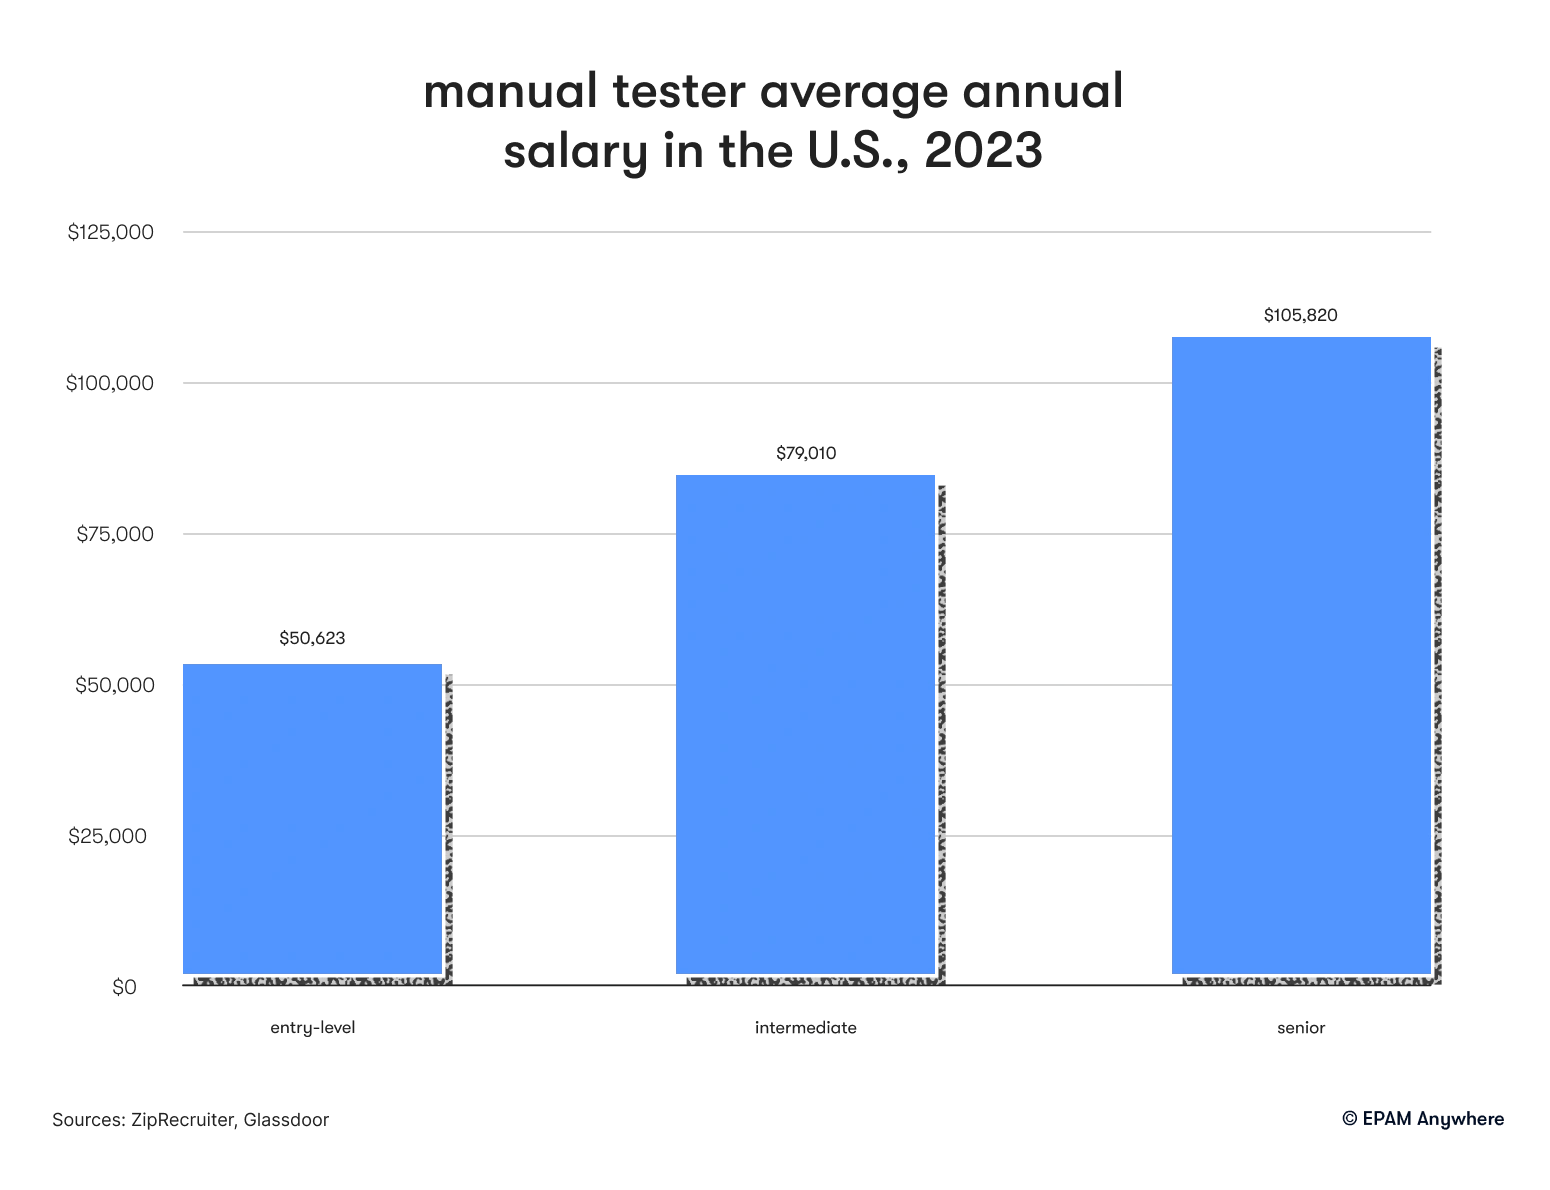 manual tester average annual salary in the U.S., 2023